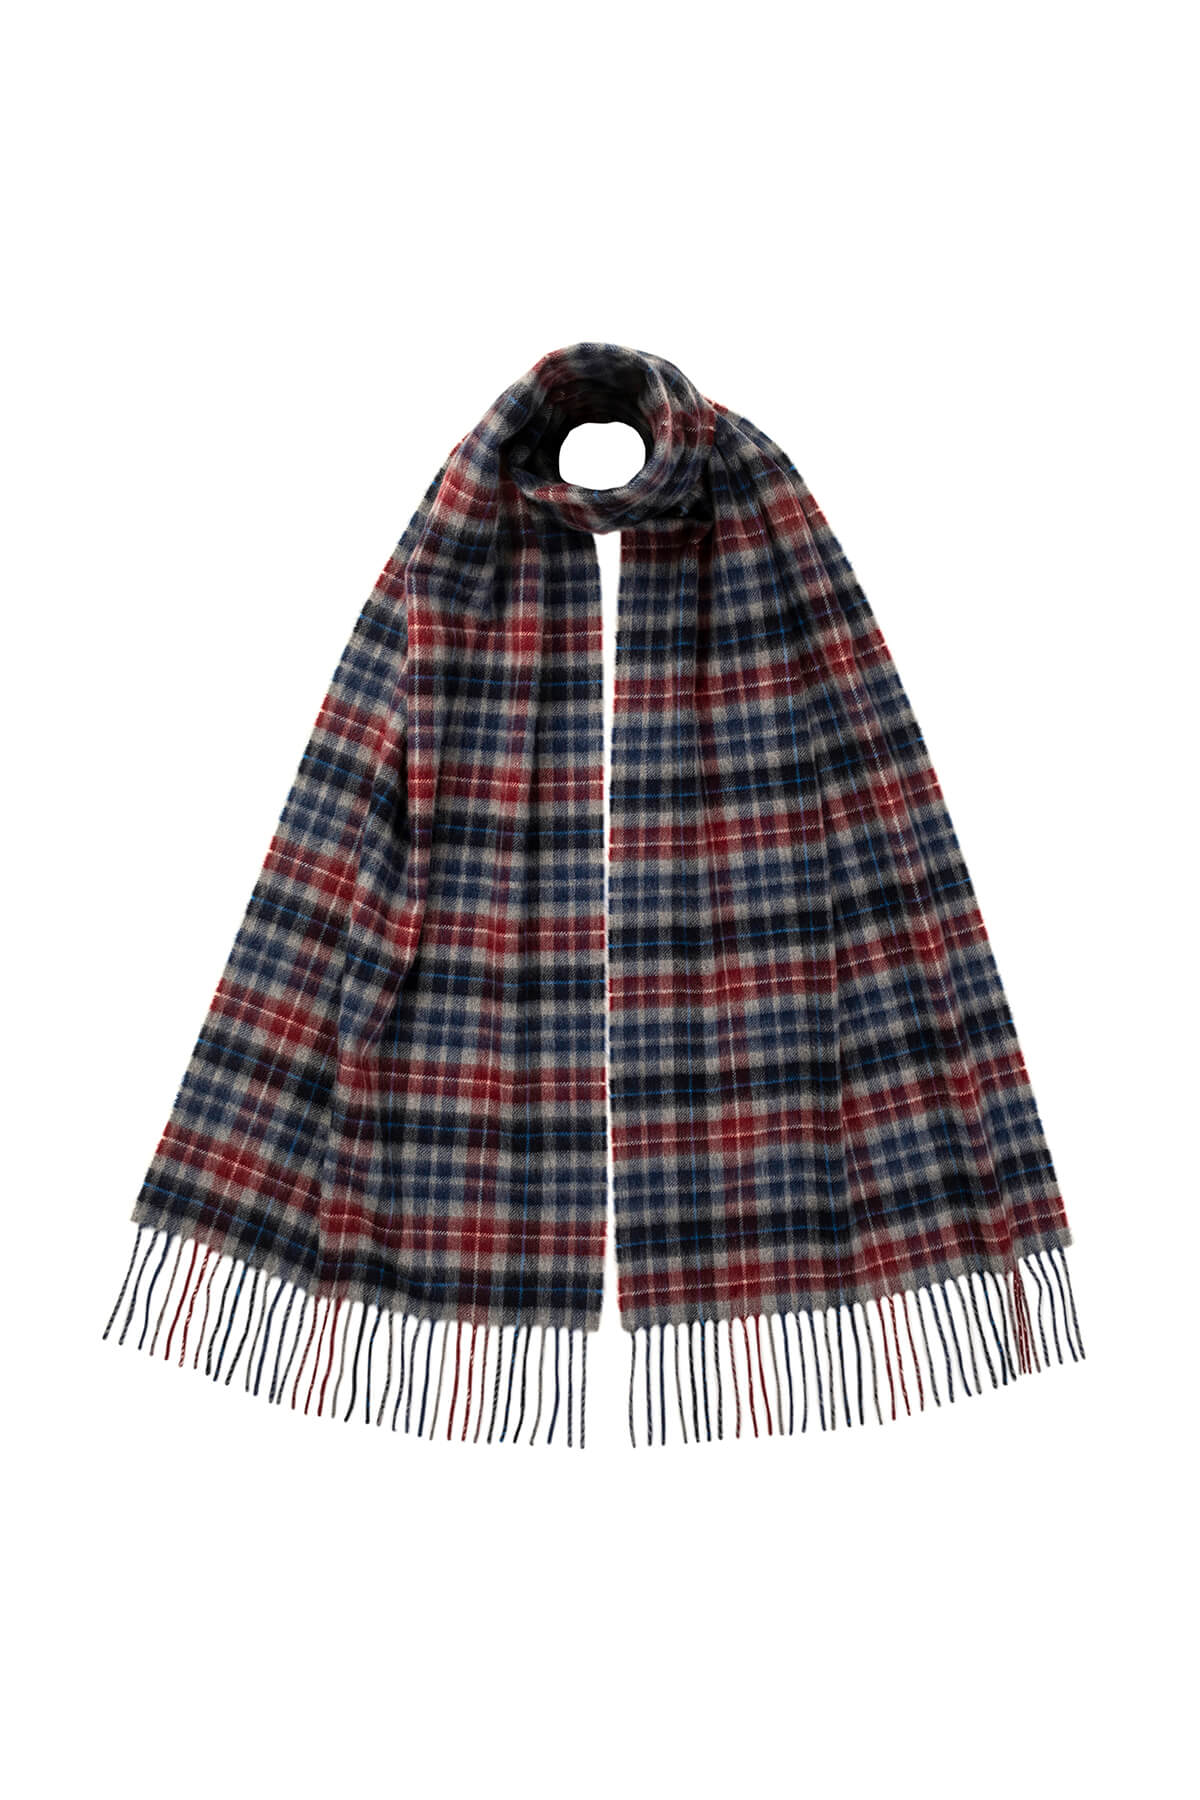 Johnstons of Elgin Small Check Cashmere Scarf in Blue on a white background WA000057RU7329ONE